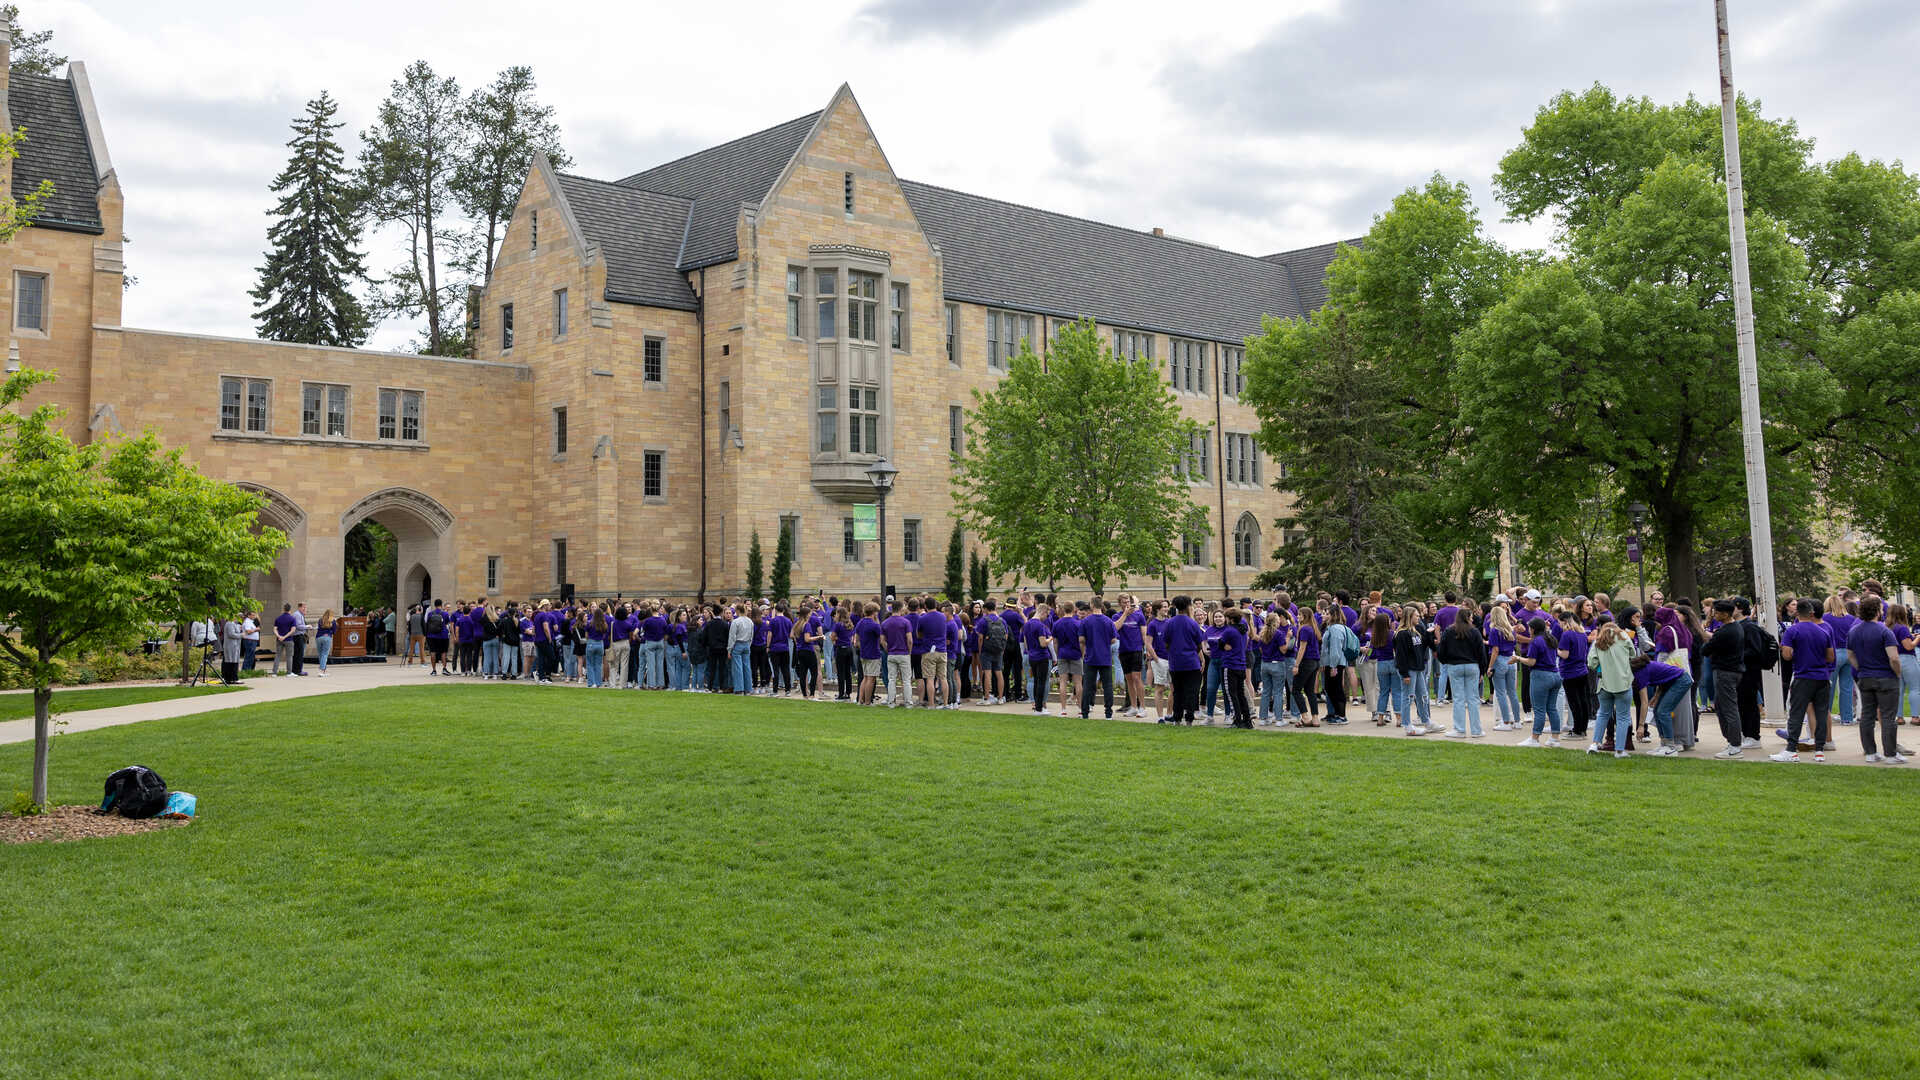 Students lined up outside of the Arches for the tradition of march out of the arches